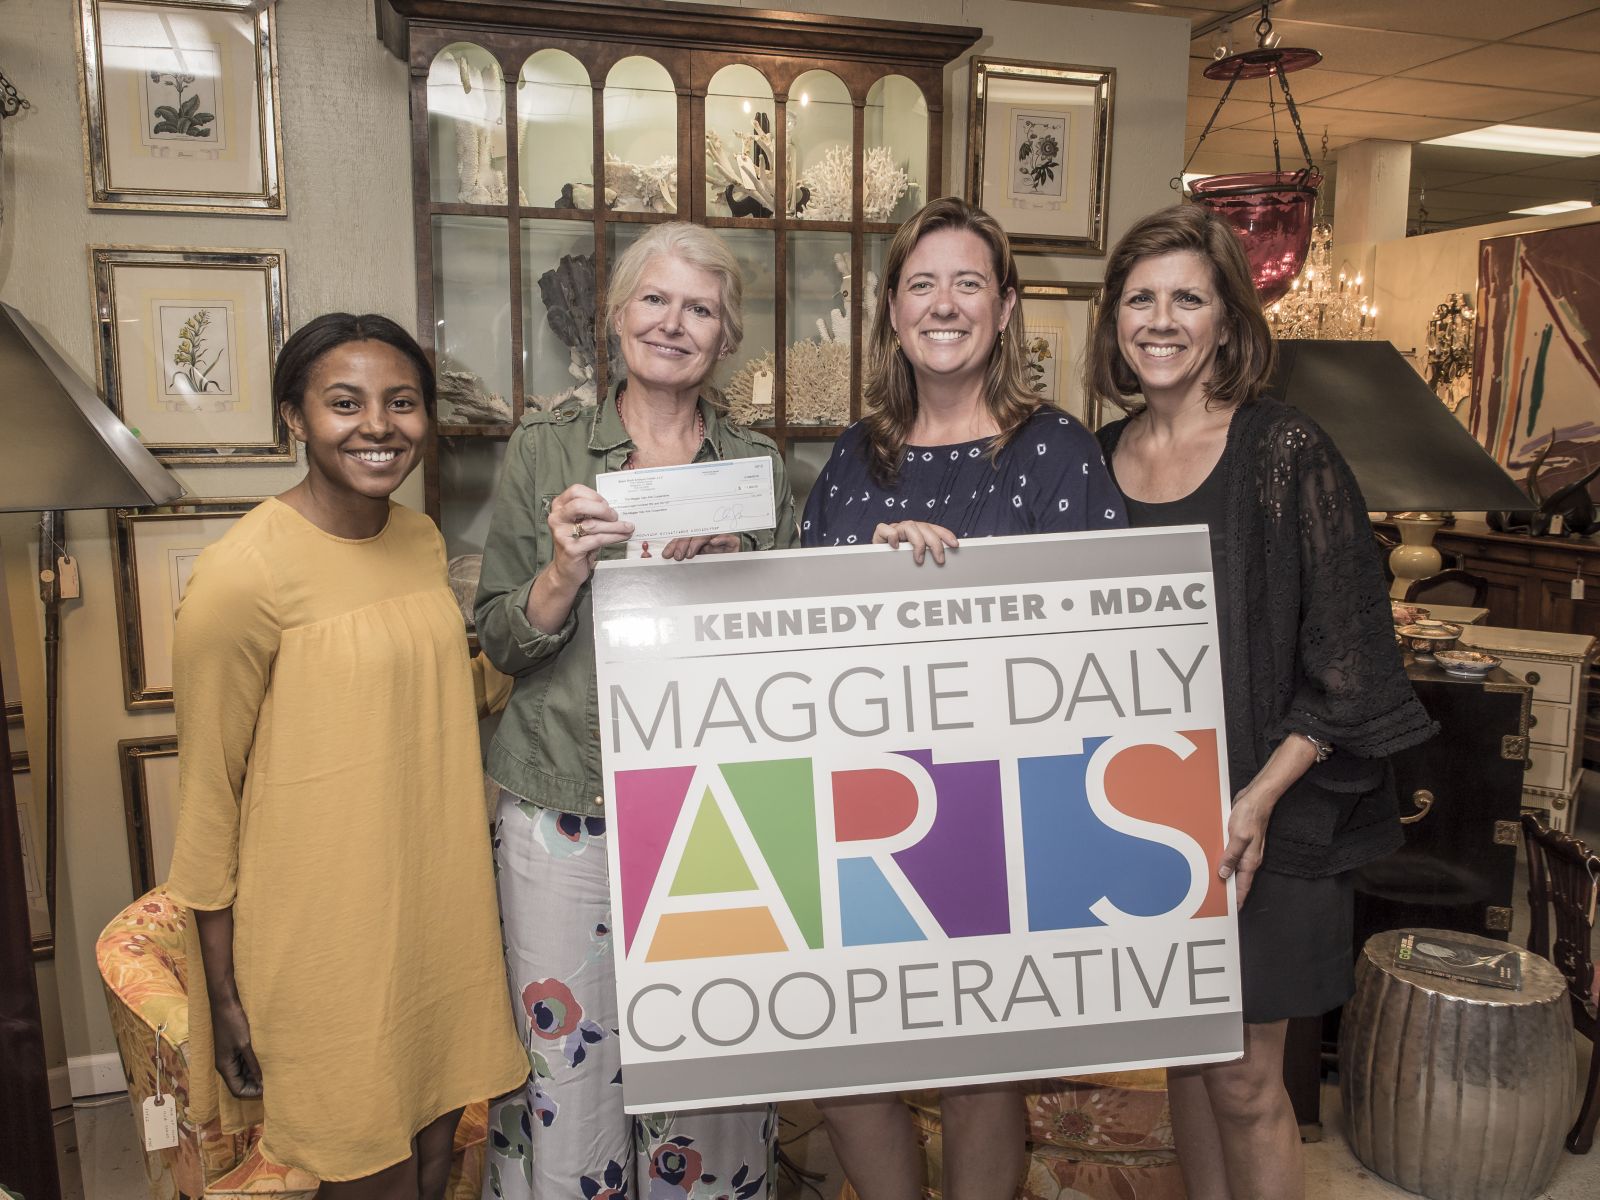 Beverly Lopez Estate, Black Rock Galleries, Maggie Daly Arts Cooperative